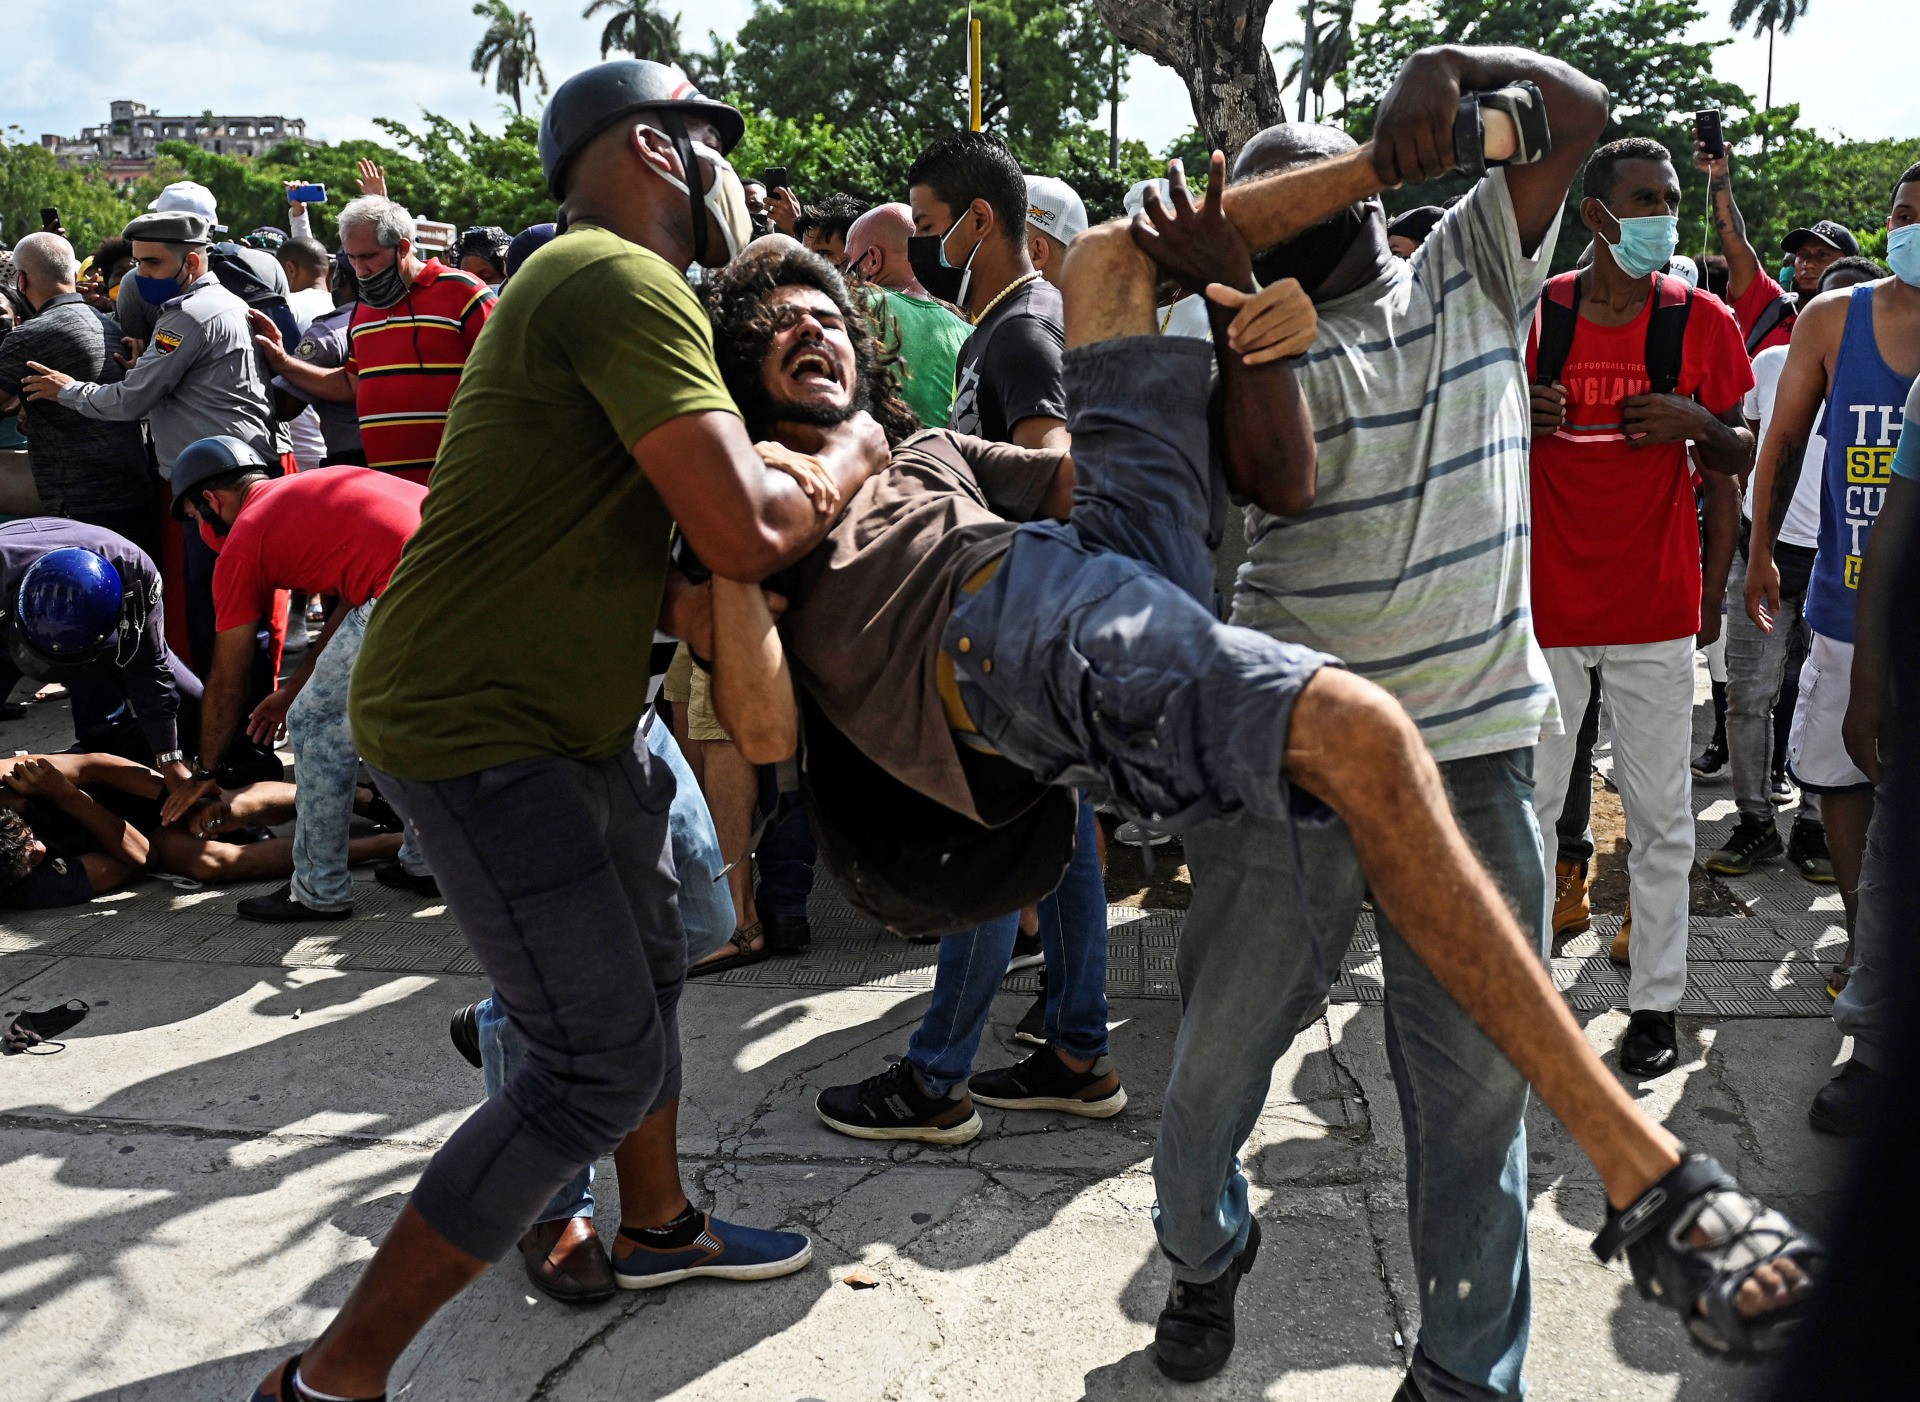 A man is arrested during a demonstration against the government of Cuban President Miguel Diaz-Canel in Havana, on July 11, 2021. - Thousands of Cubans took part in rare protests Sunday against the communist government, marching through a town chanting "Down with the dictatorship" and "We want liberty." (Photo by YAMIL LAGE / AFP) (Photo by YAMIL LAGE/AFP via Getty Images)